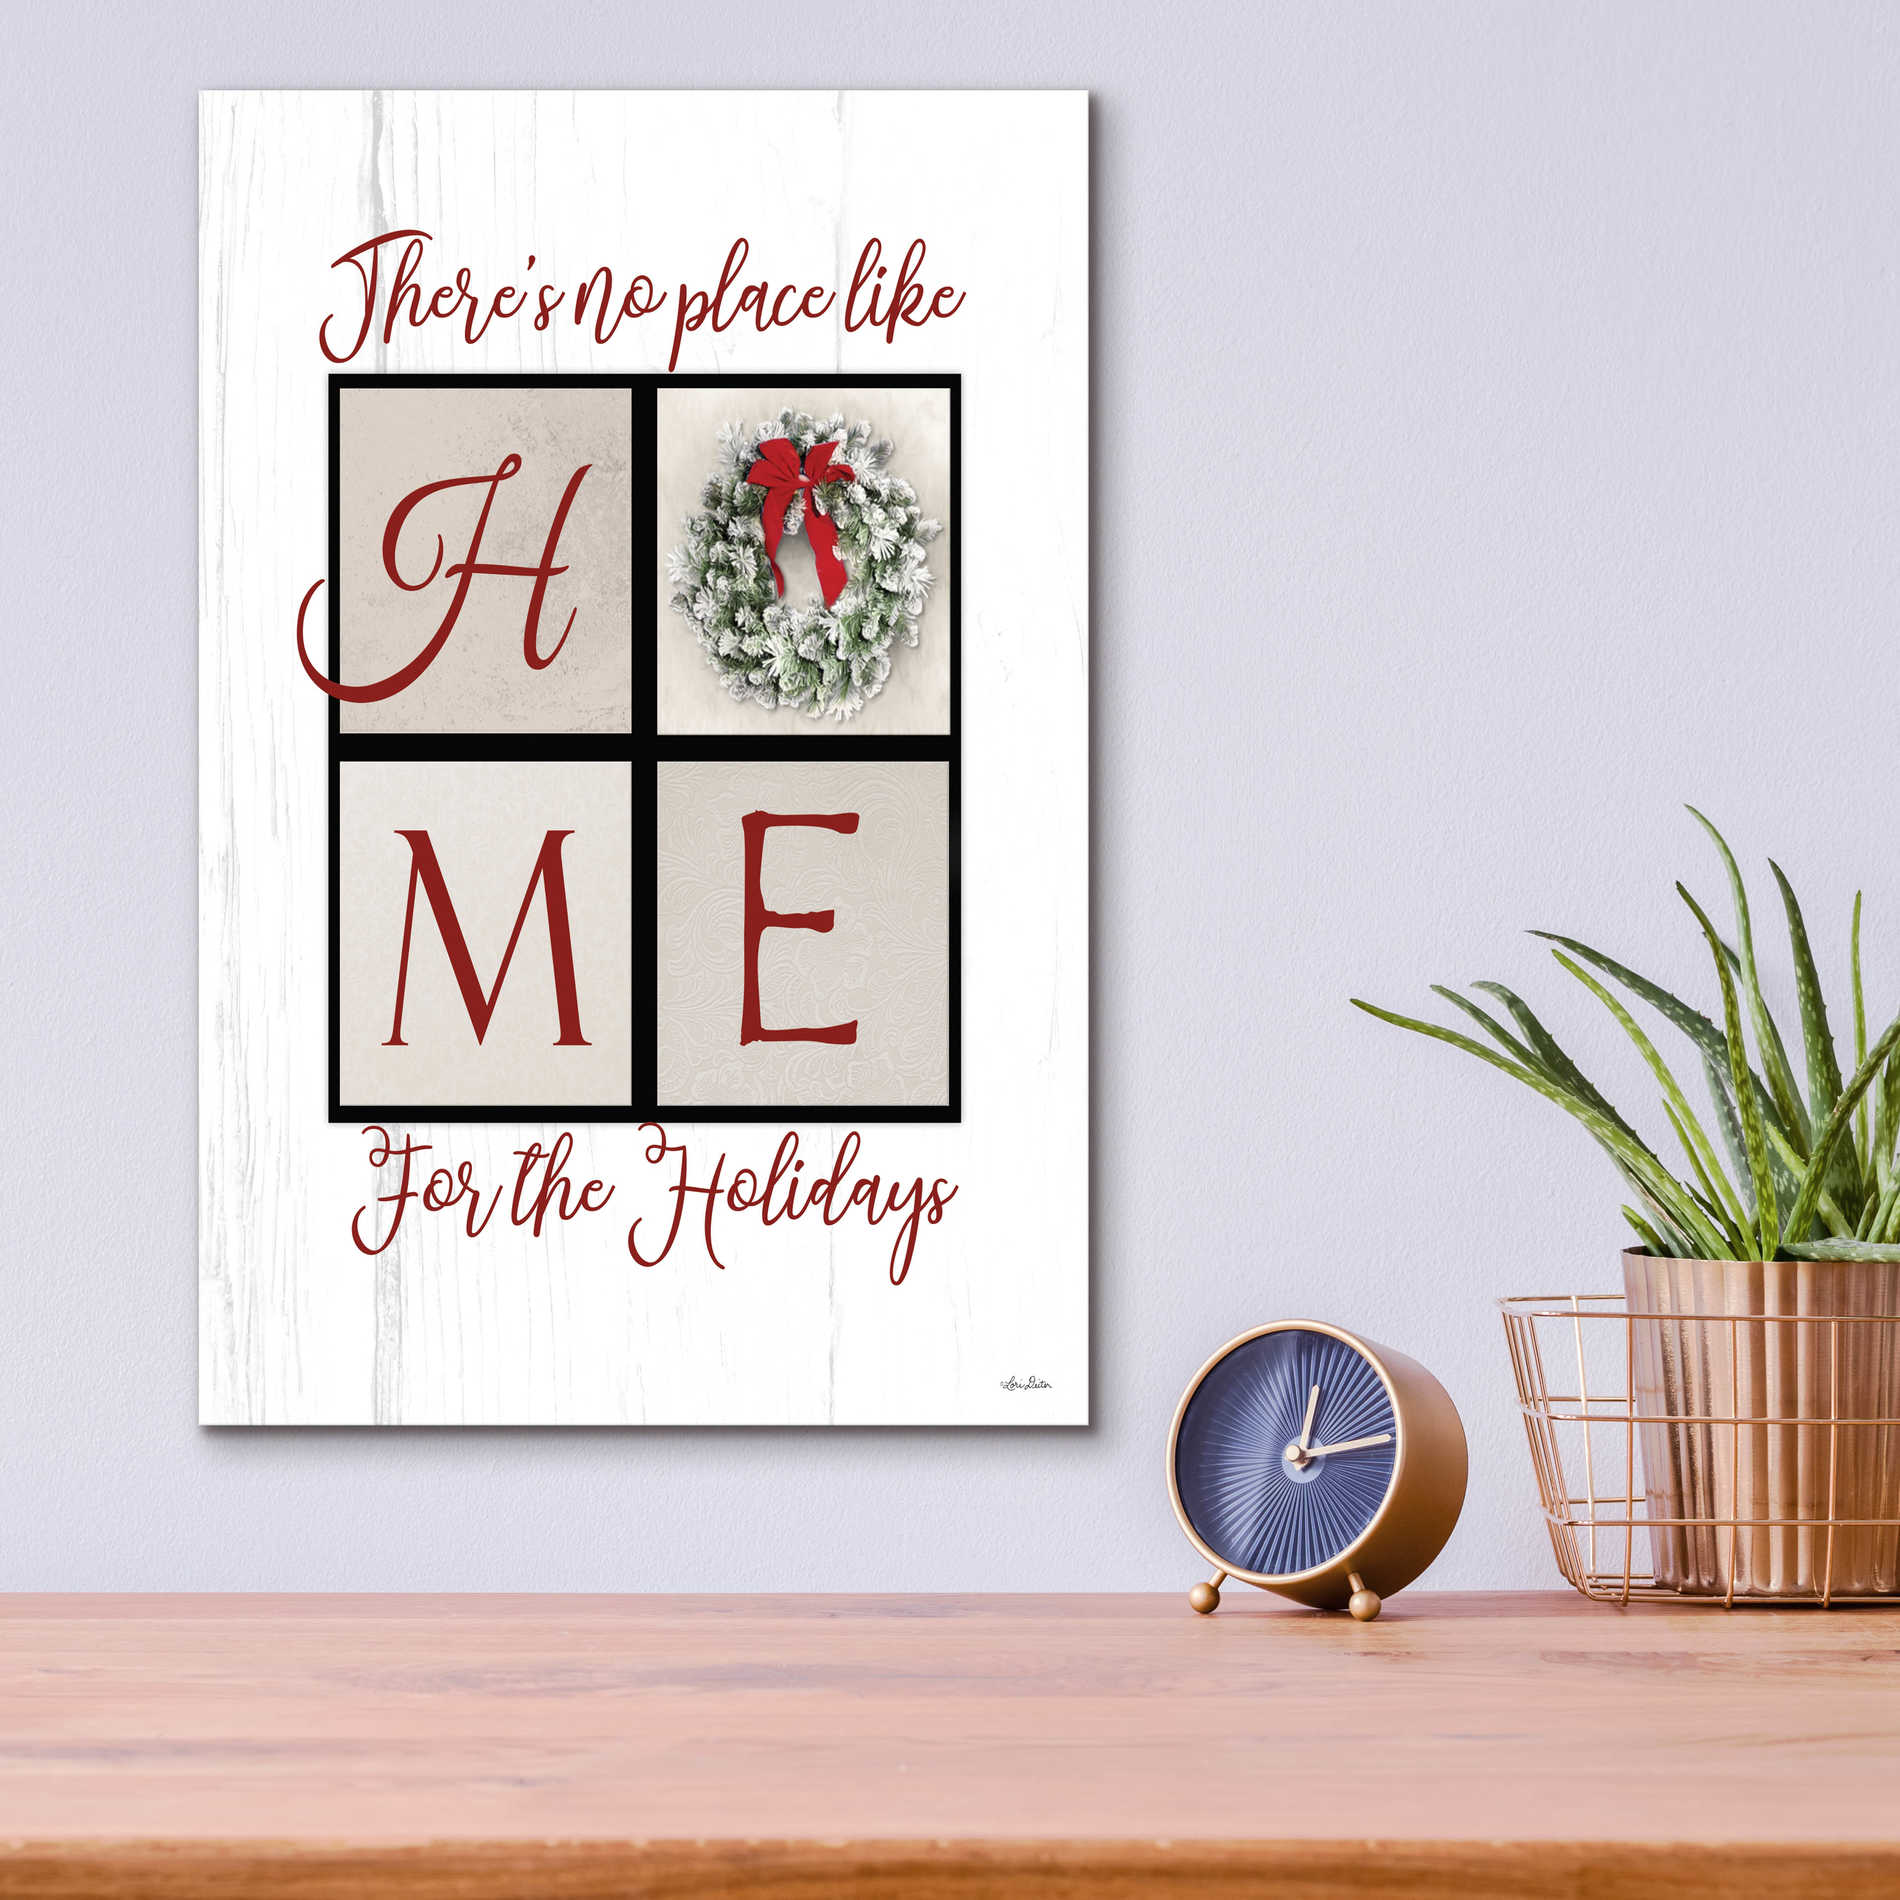 Epic Art 'There's No Place Like Home for the Holidays' by Lori Deiter Acrylic Glass Wall Art,12x16